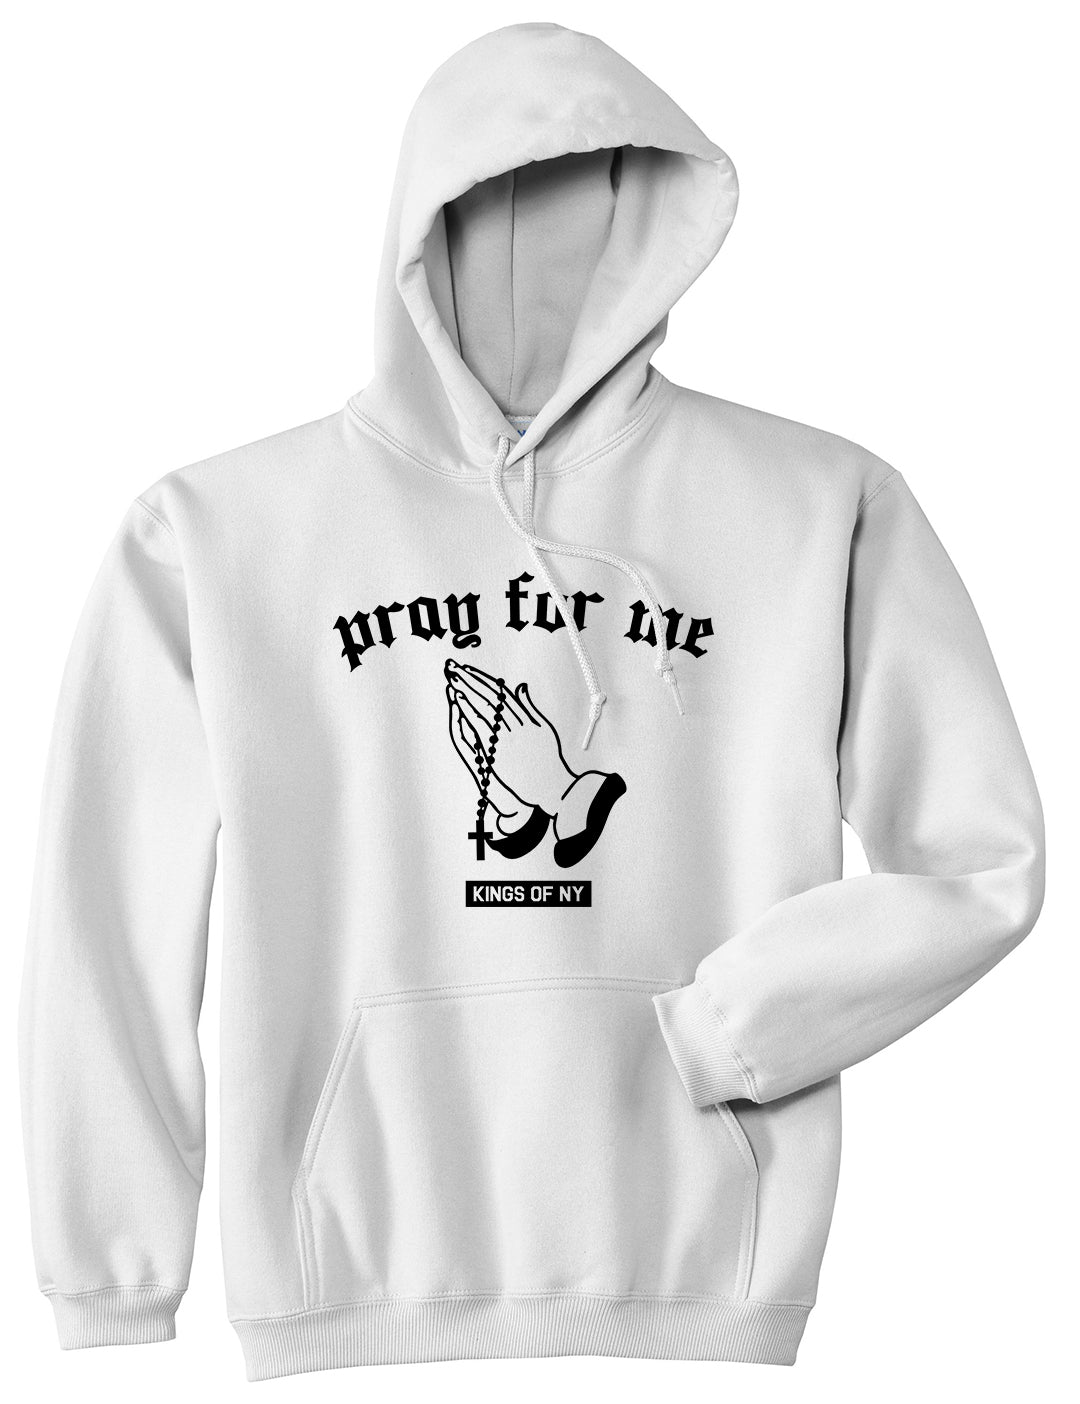 Pray For Me Mens Pullover Hoodie White by Kings Of NY